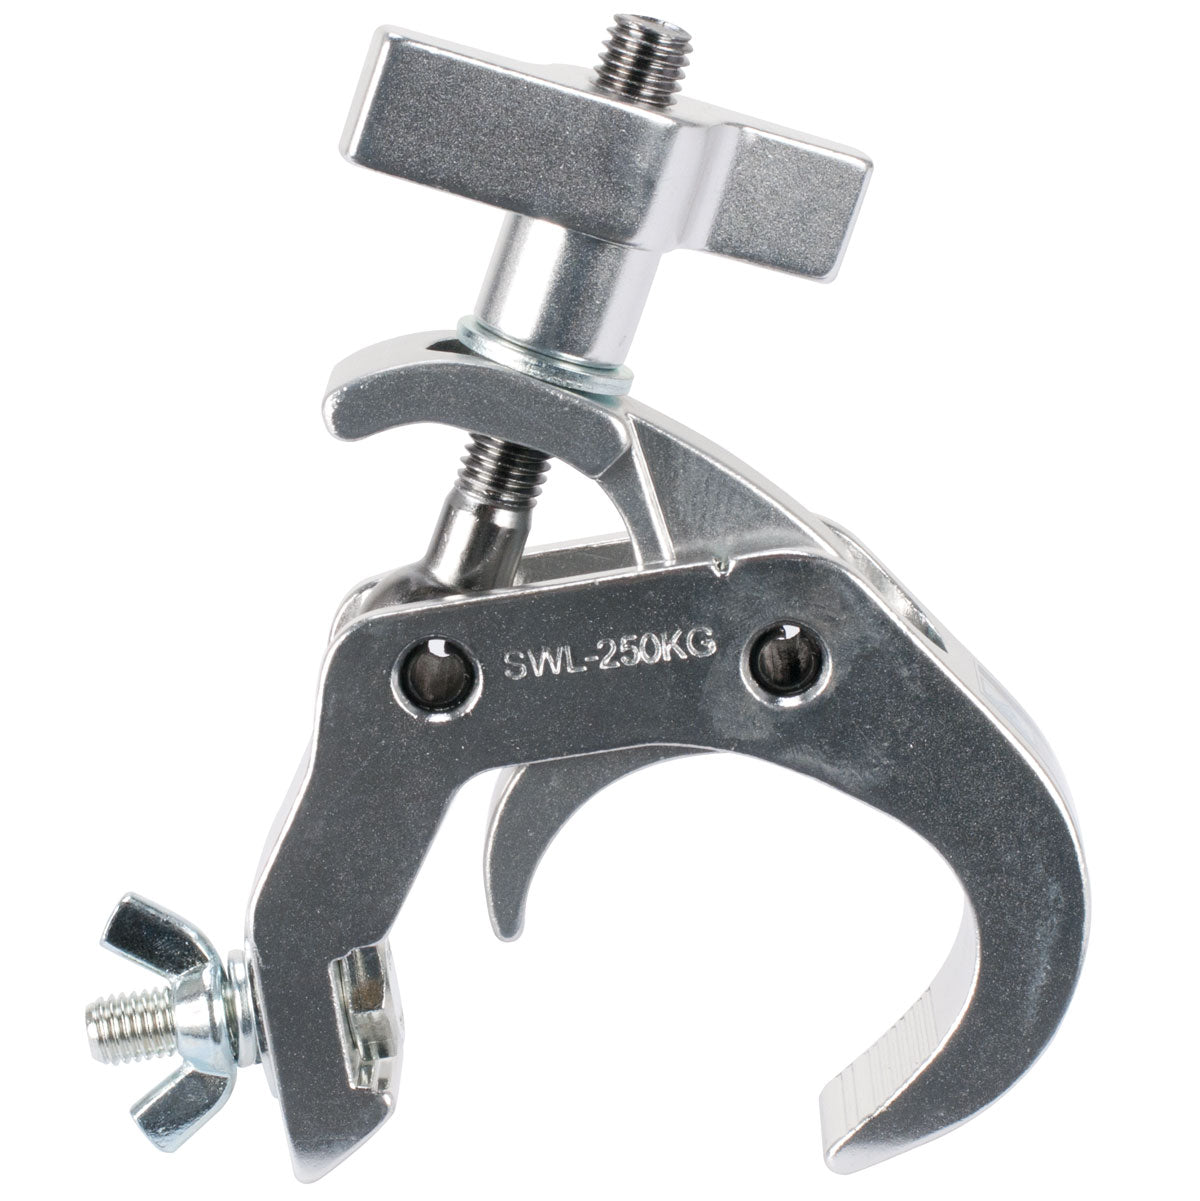 Elation Quick Rig Clamp - Heavy Duty Wrap Around Low Profile Hook Style Clamp